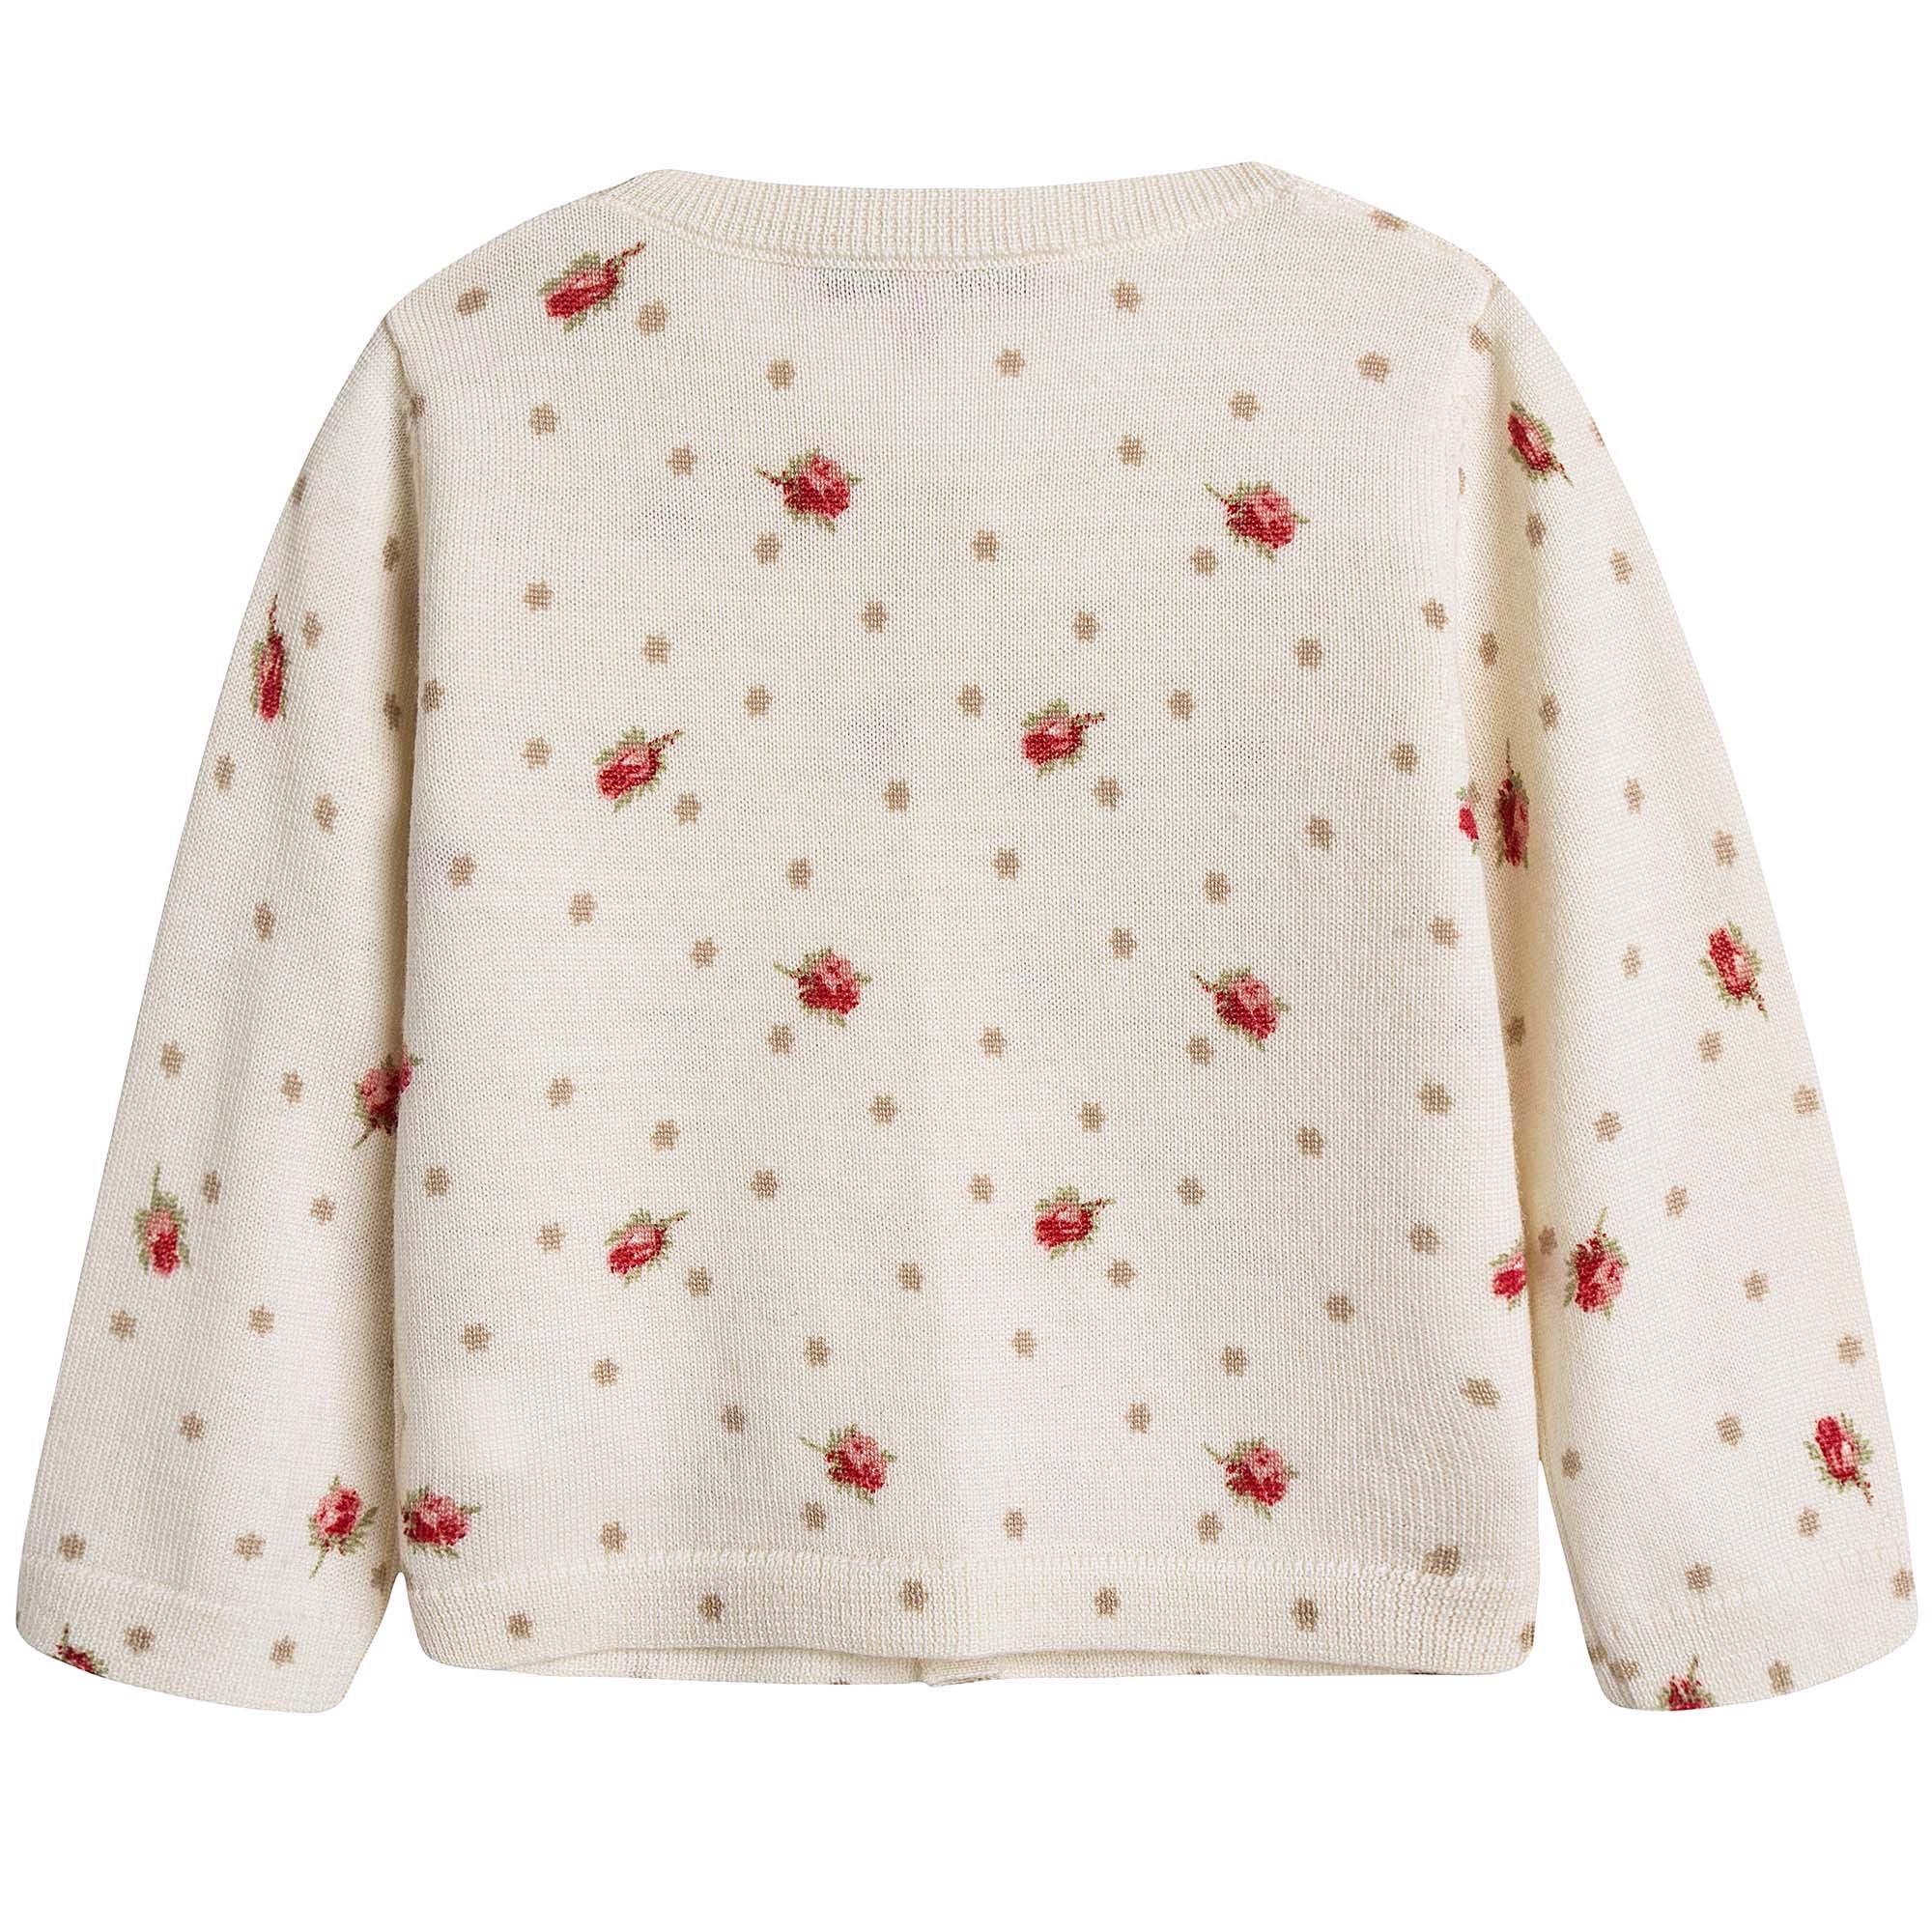 Baby Girls Lvory With Red Flowers Wool Cardigan - CÉMAROSE | Children's Fashion Store - 2